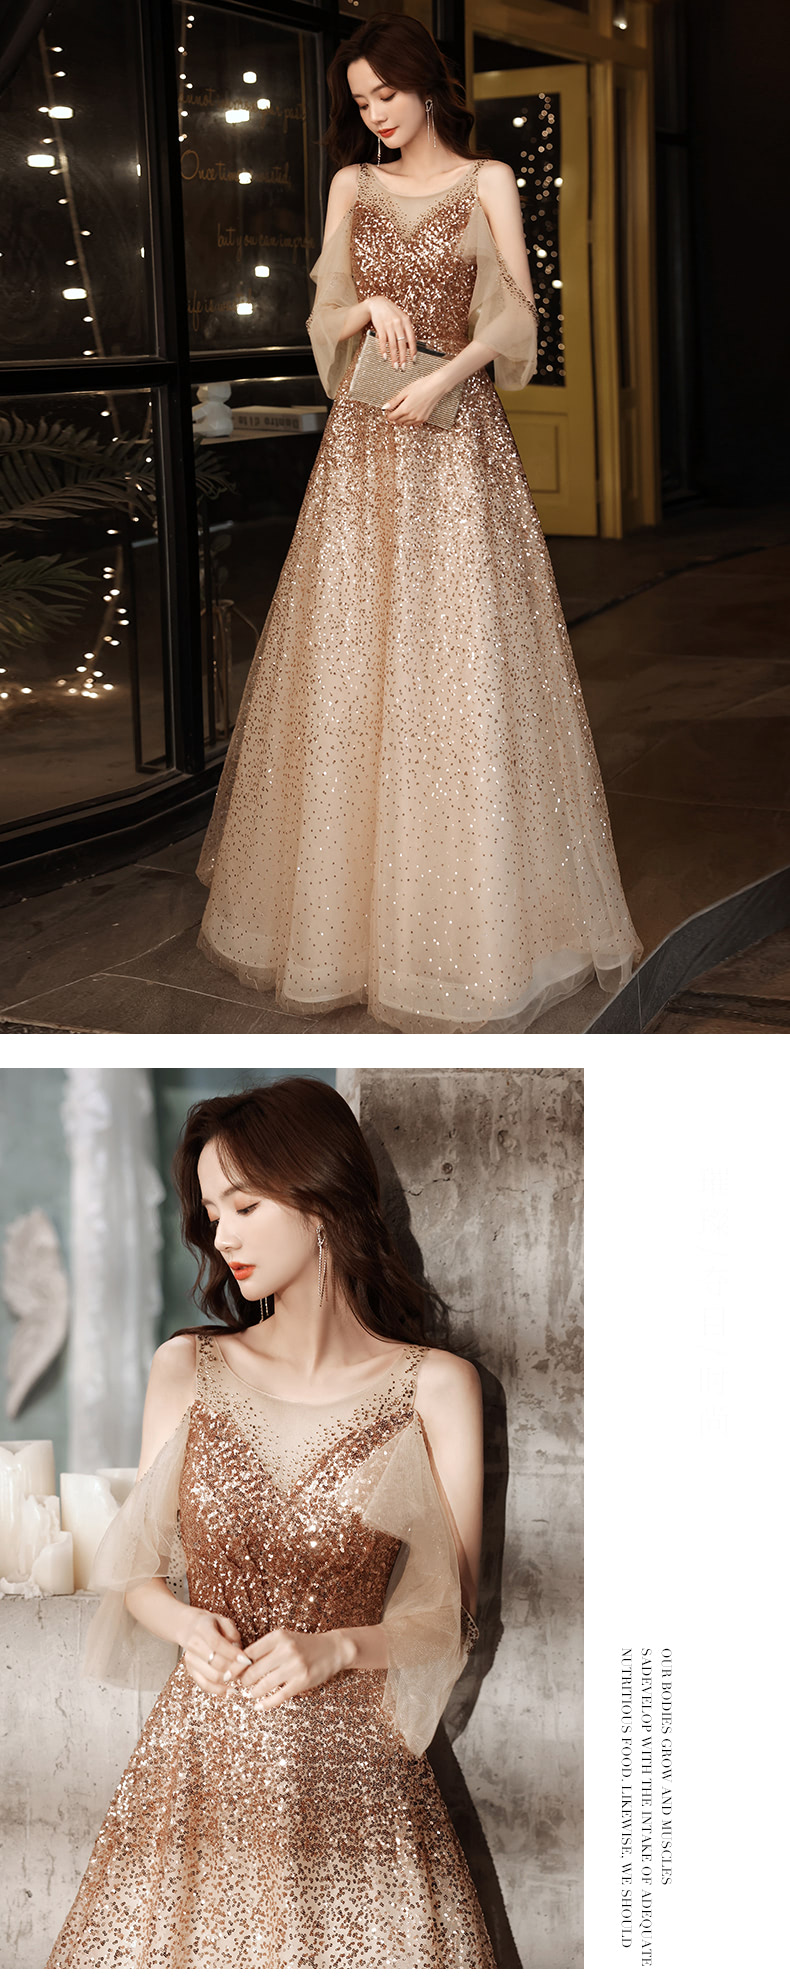 Elegant-Cocktail-Party-Dress-Evening-Gown-for-Prom-and-Homecoming11.jpg